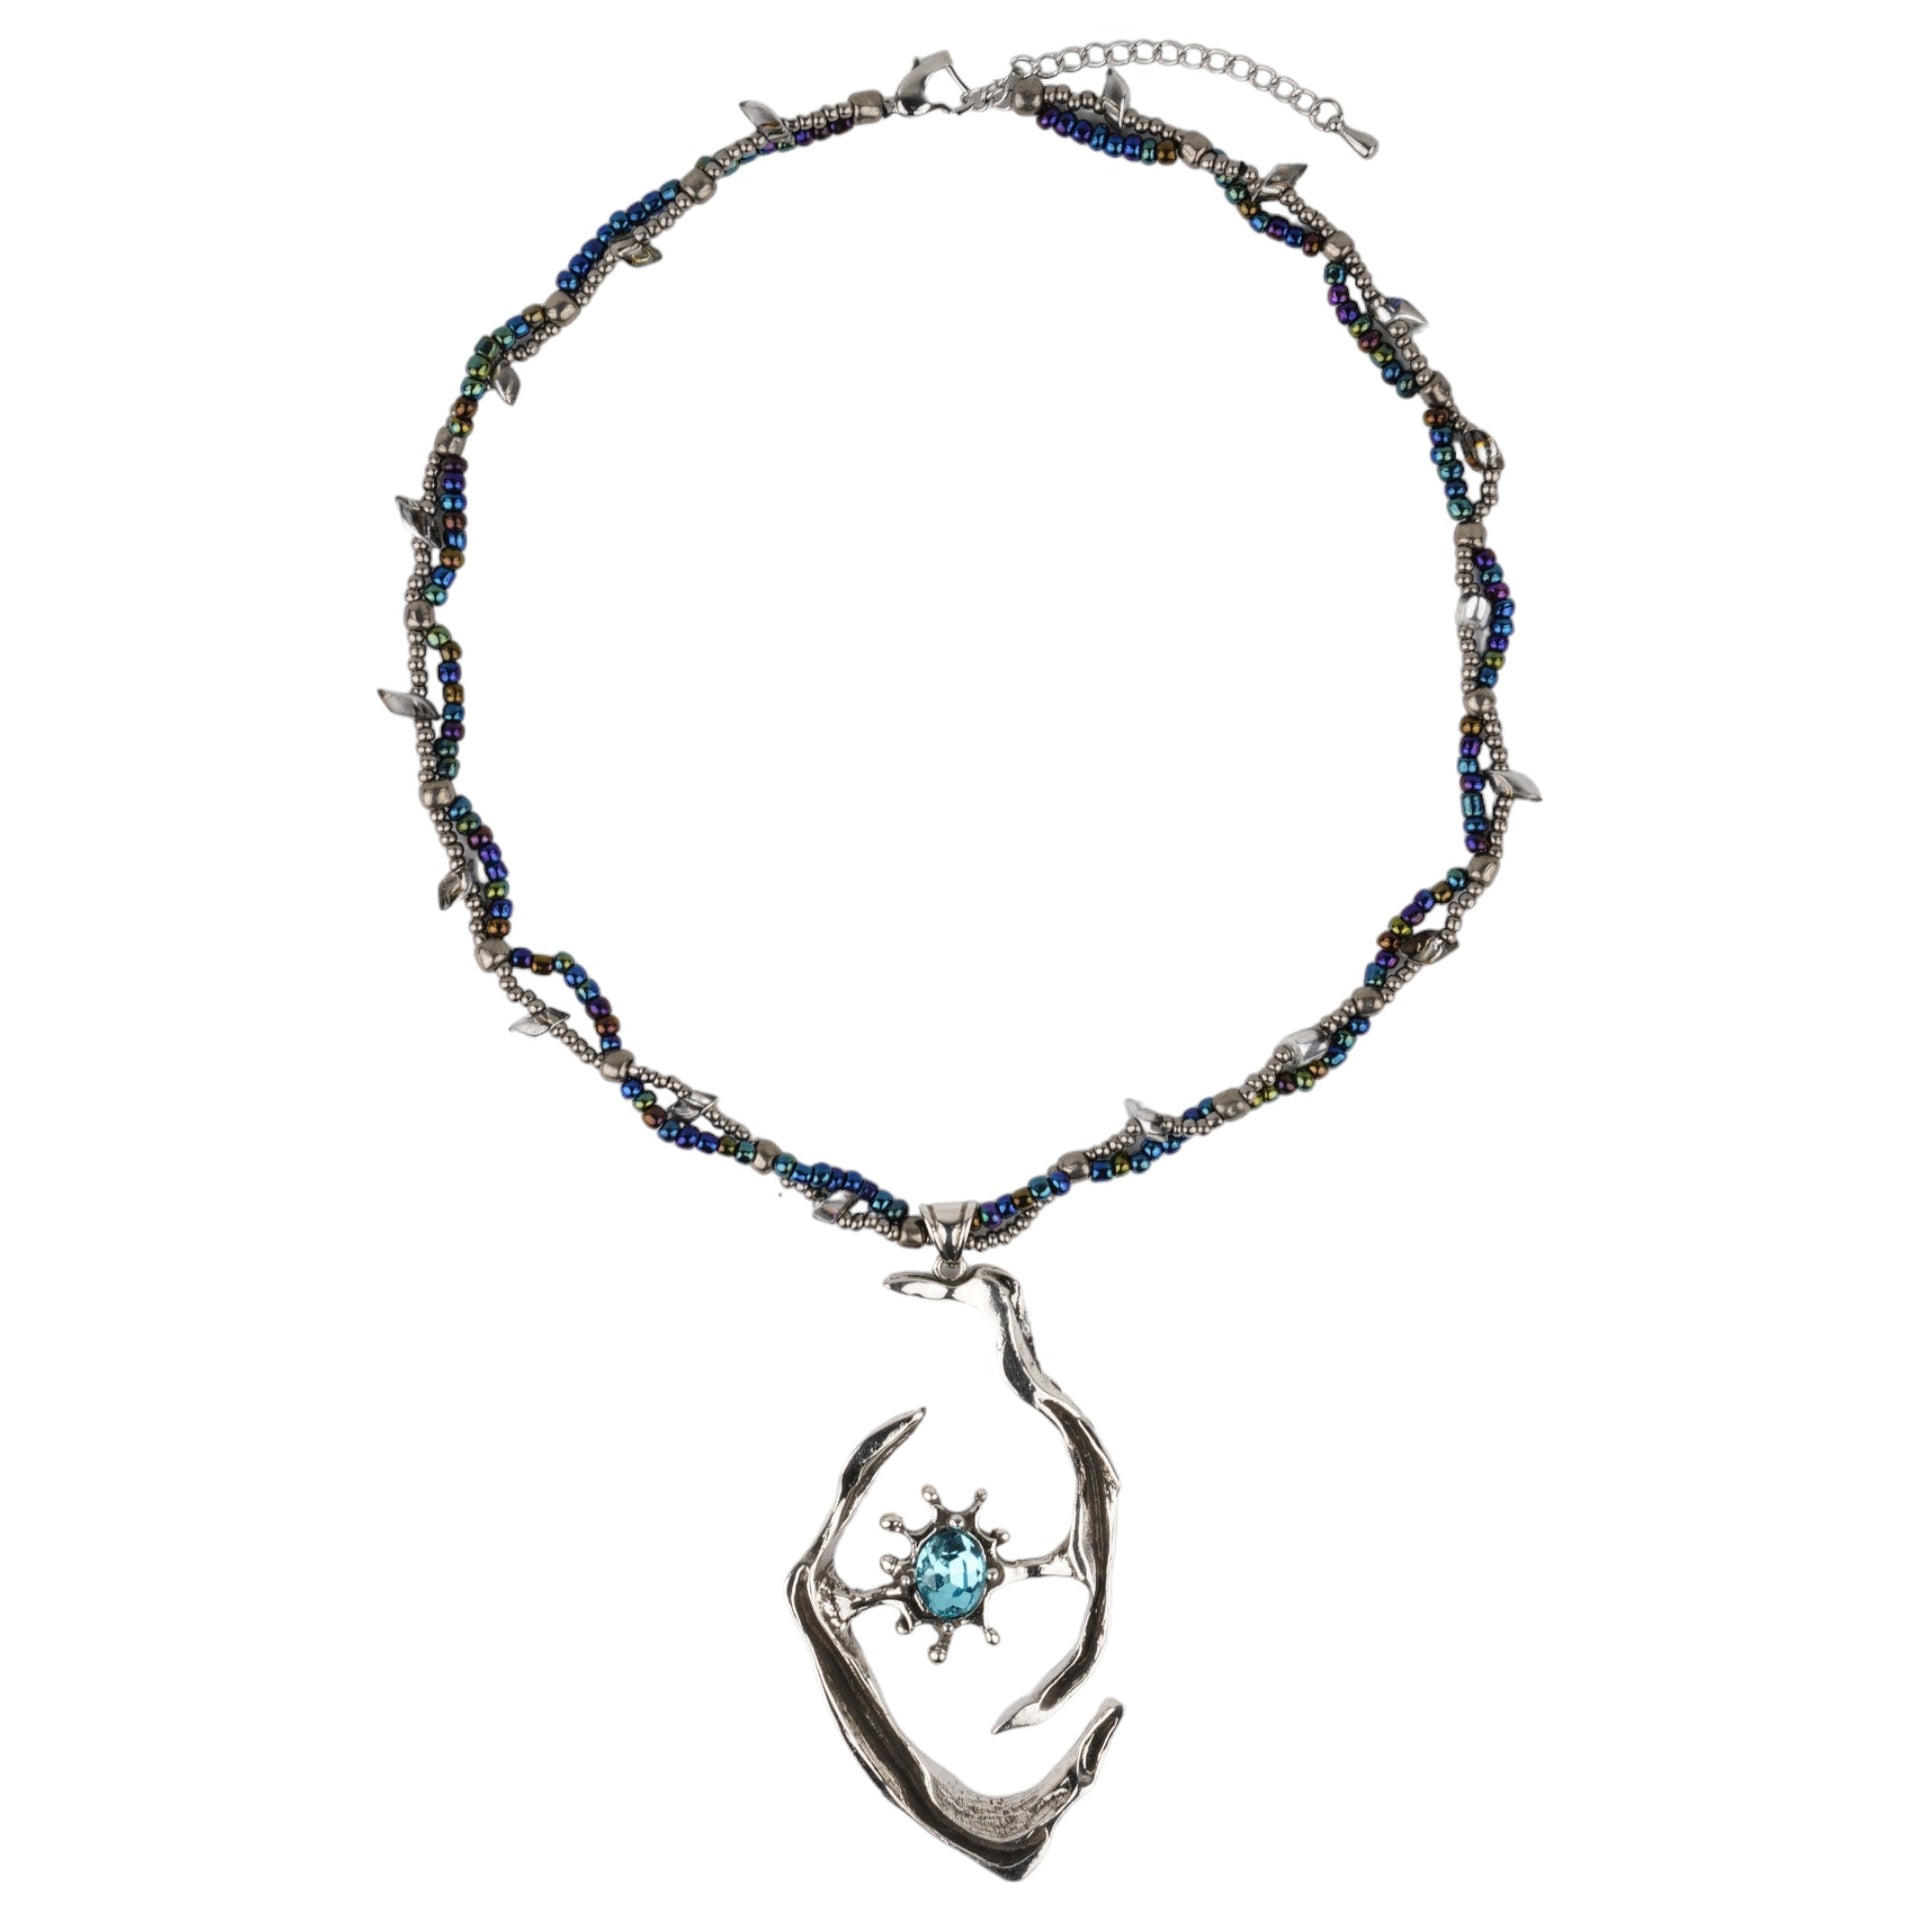 BEADED METAL PLAQUE NECKLACE / BLUE/SILVER